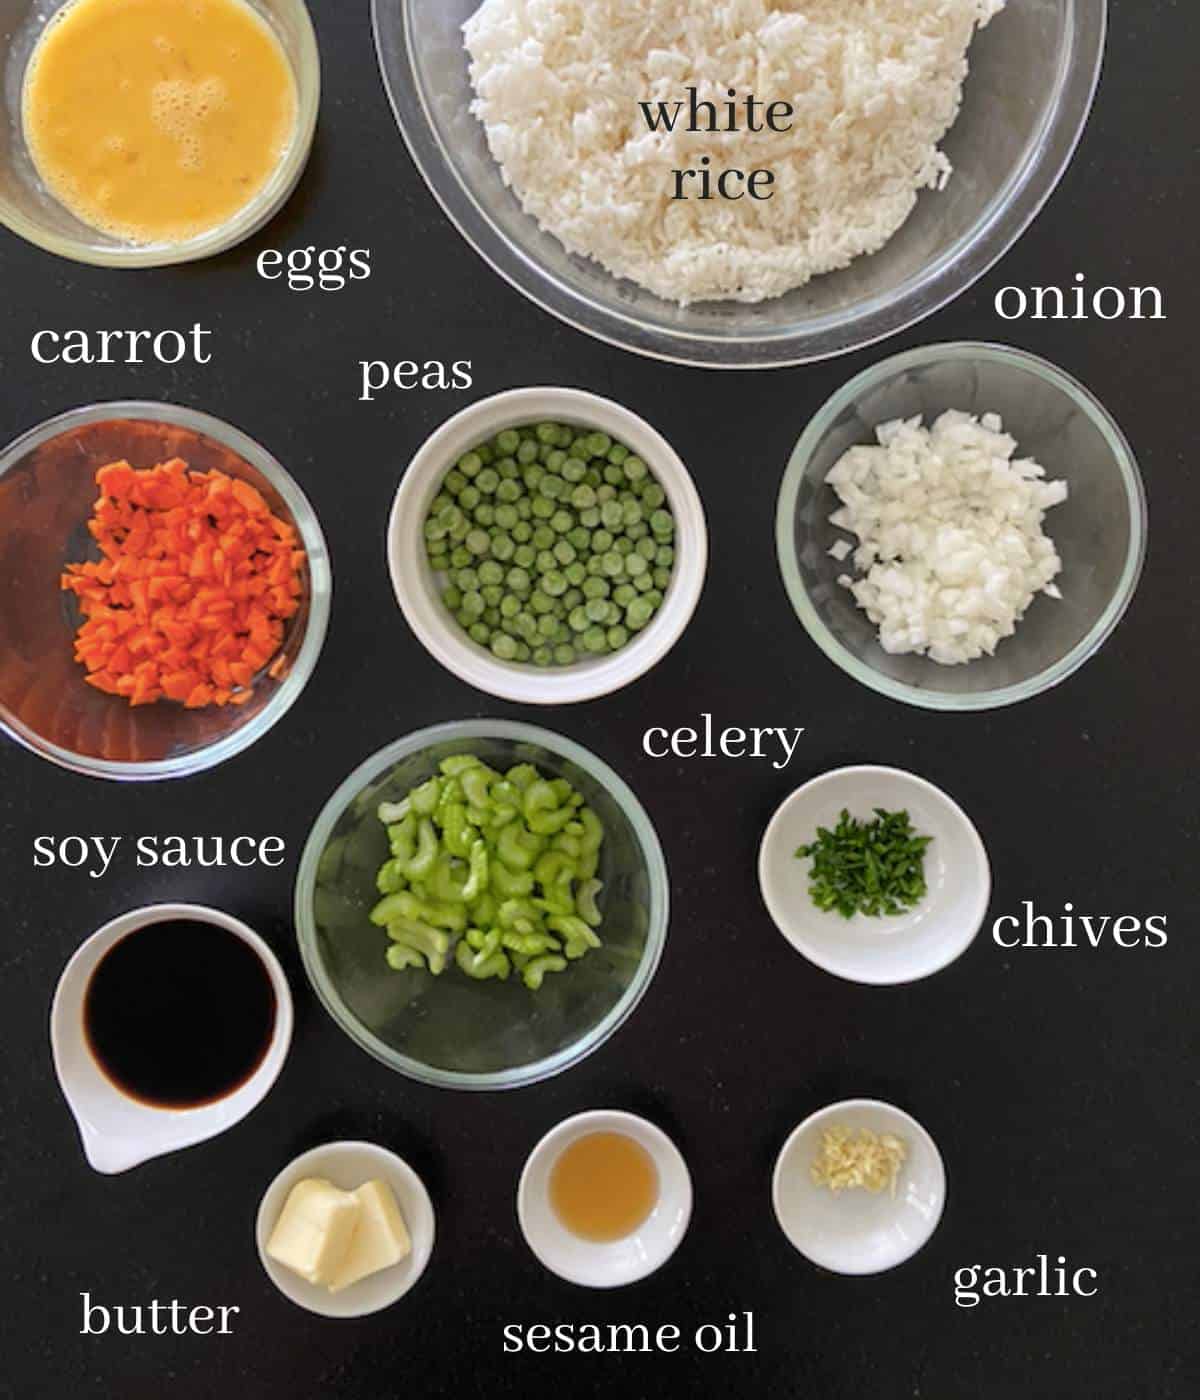 Ingredients for blackstone fried rice on black countertop.